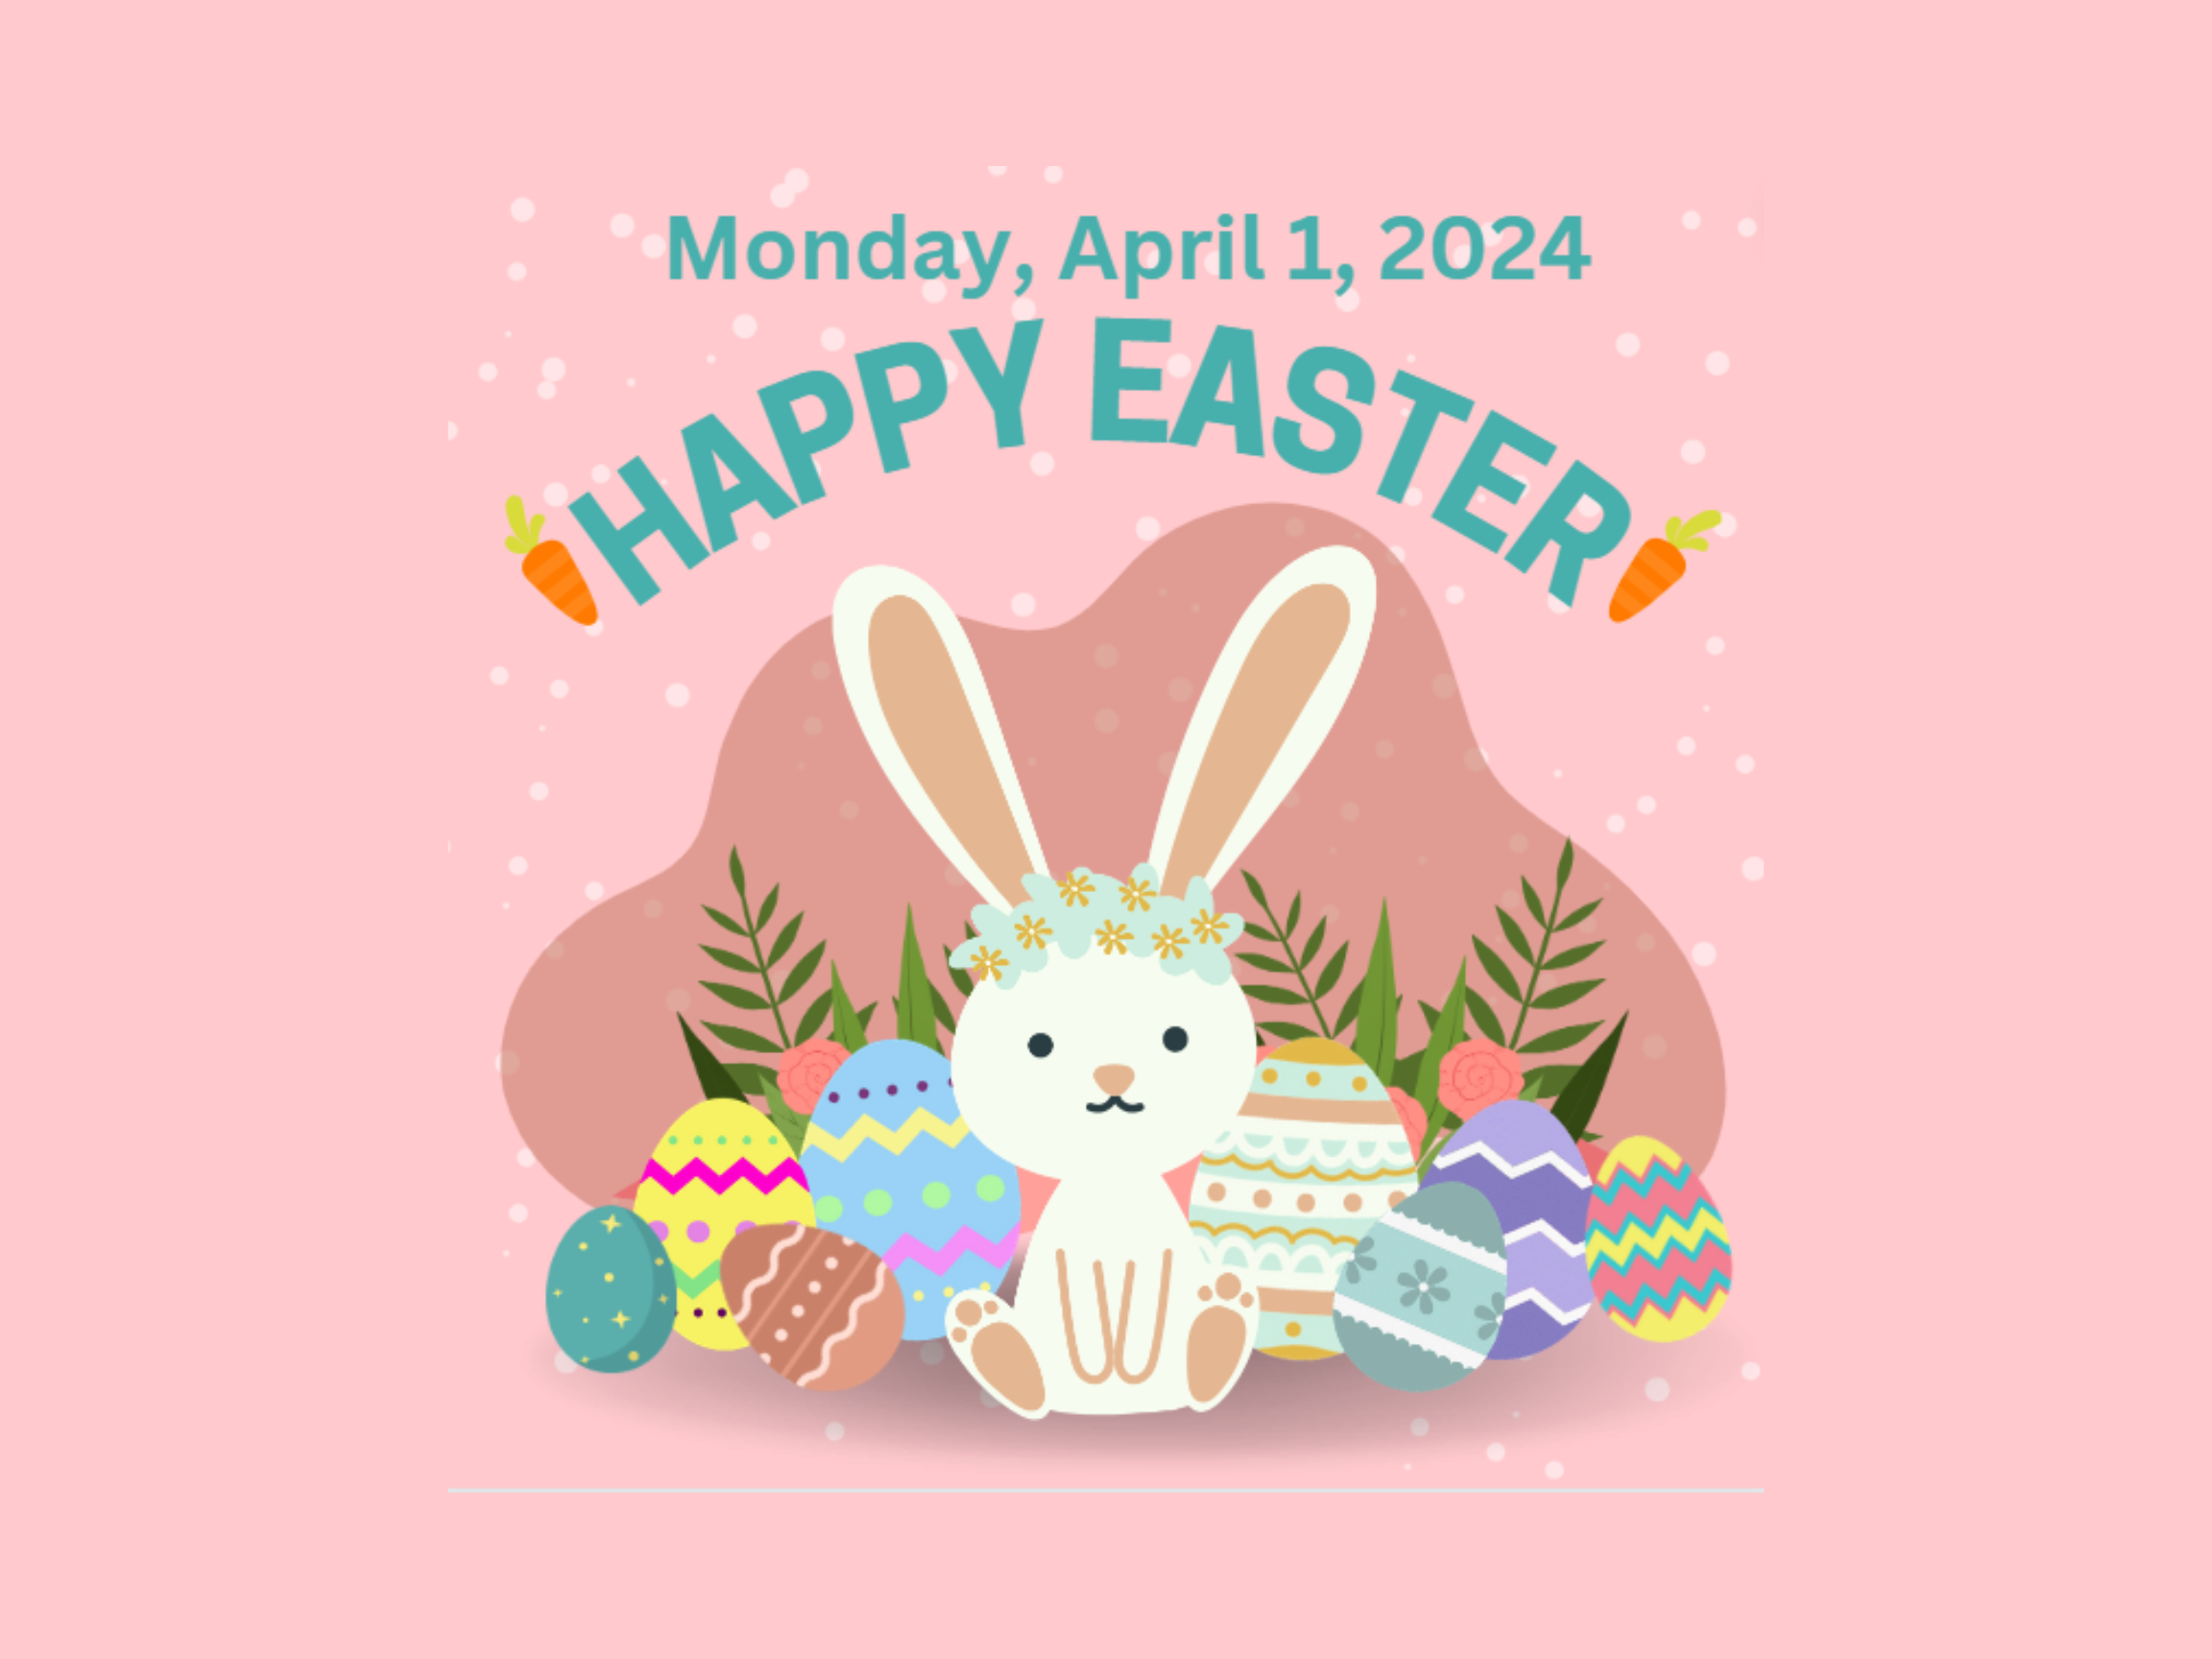 Happy Easter - Monday, April 1, 2024